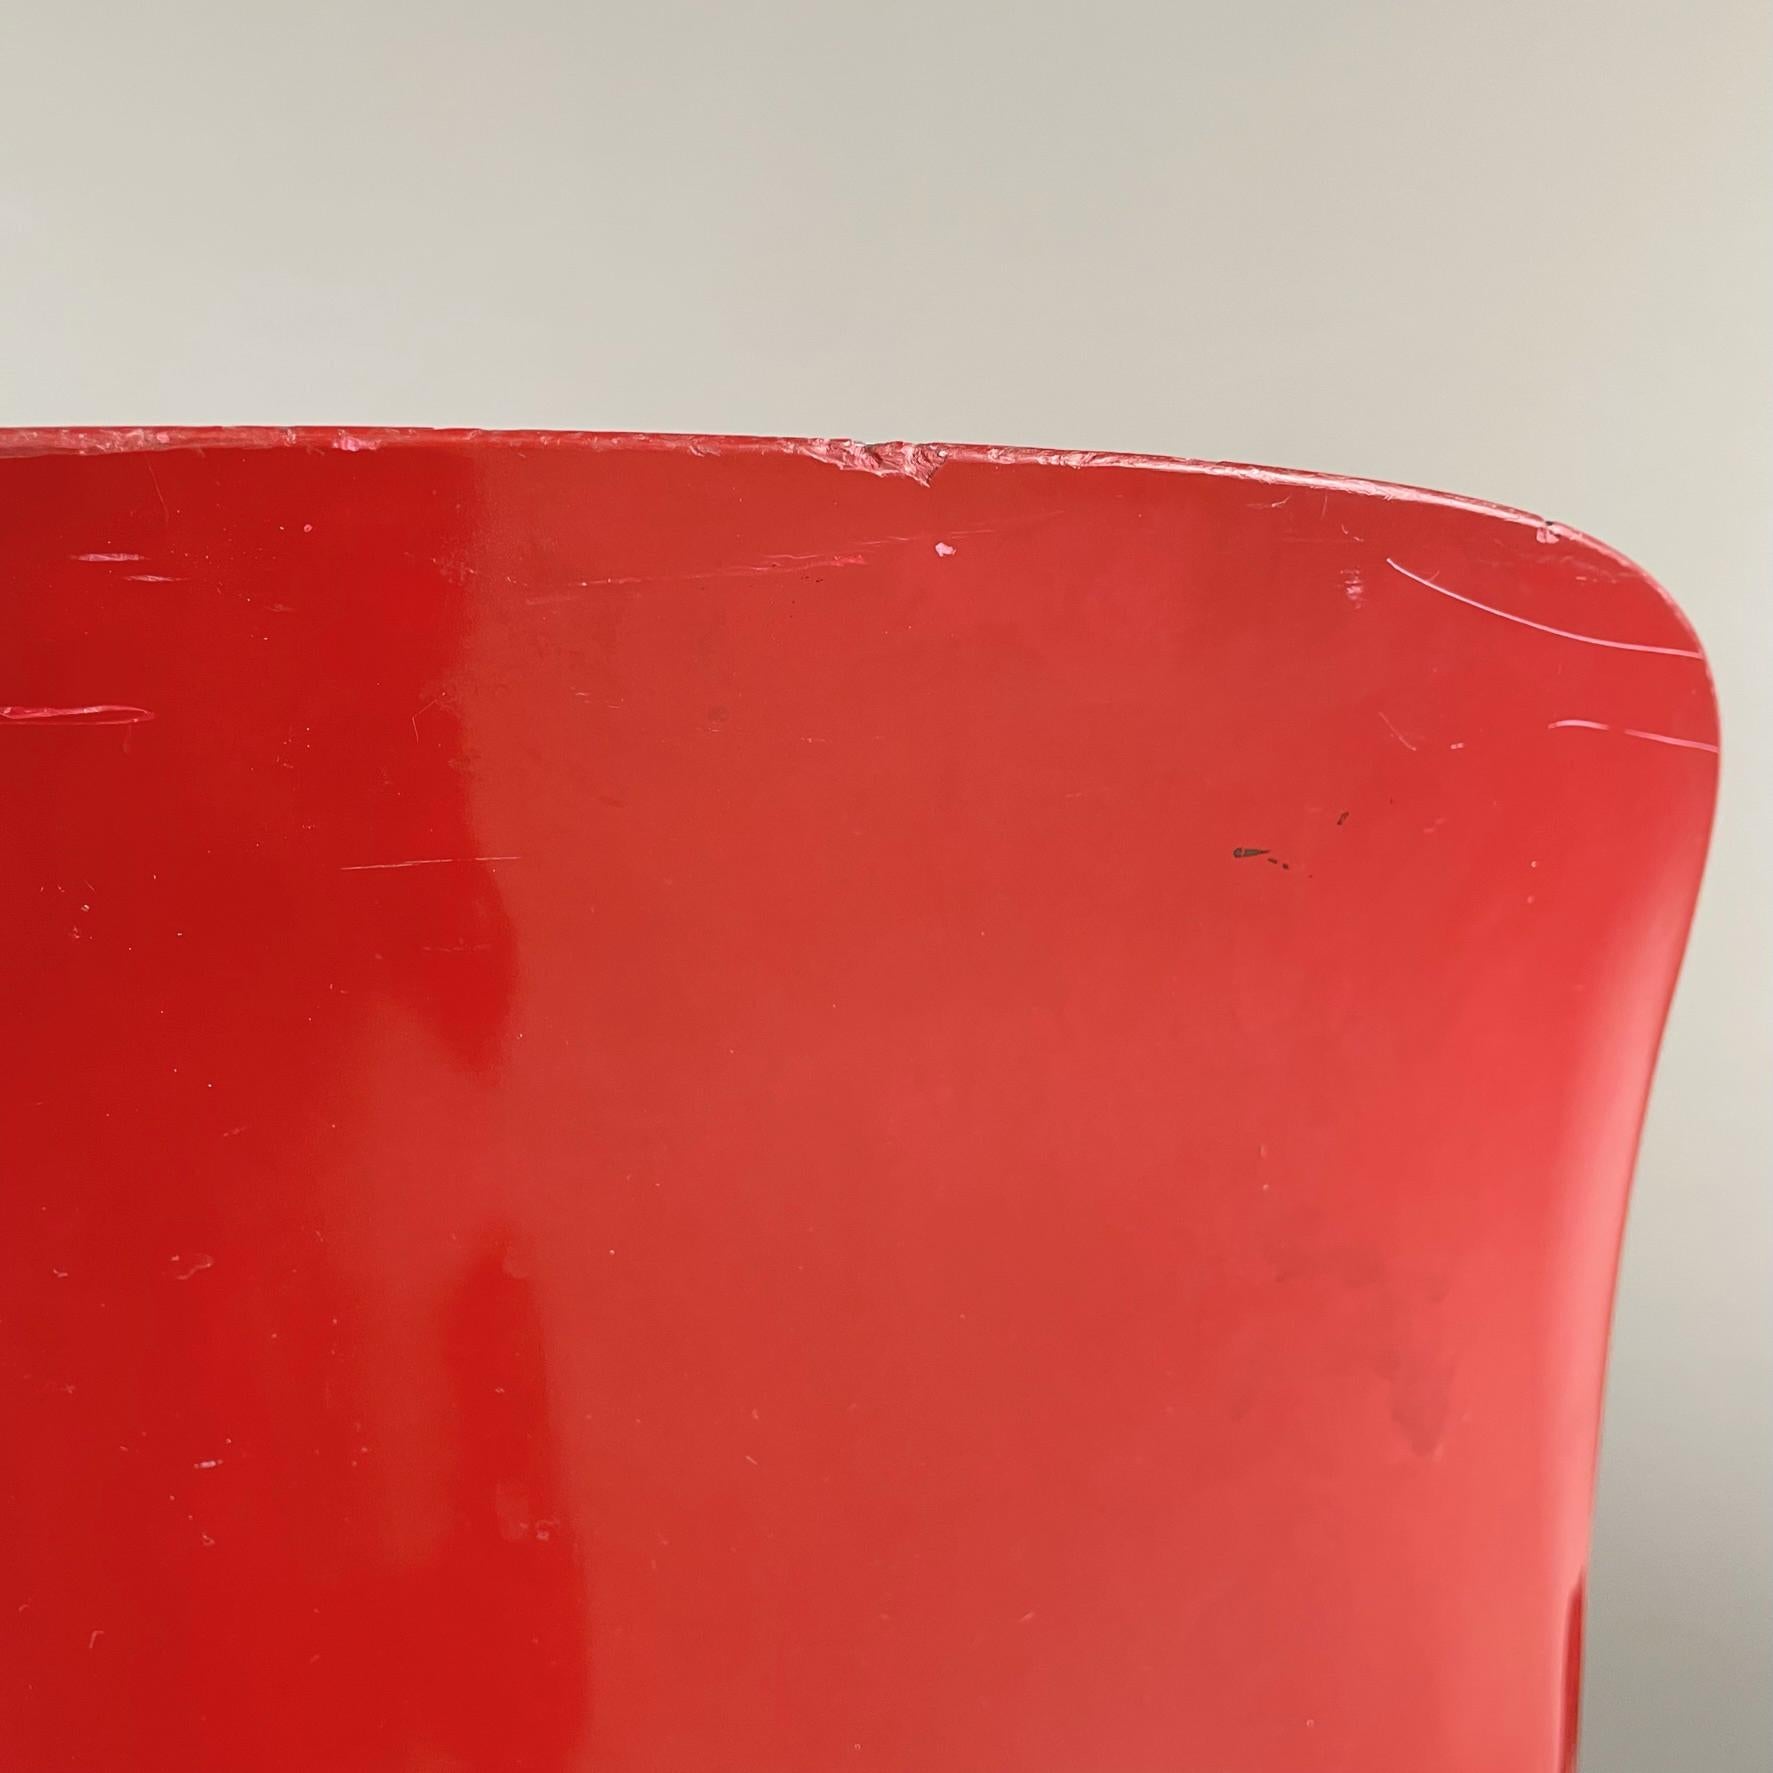 Italian modern plastic red Chairs Selene by Vico Magistretti for Artemide, 1960s For Sale 11